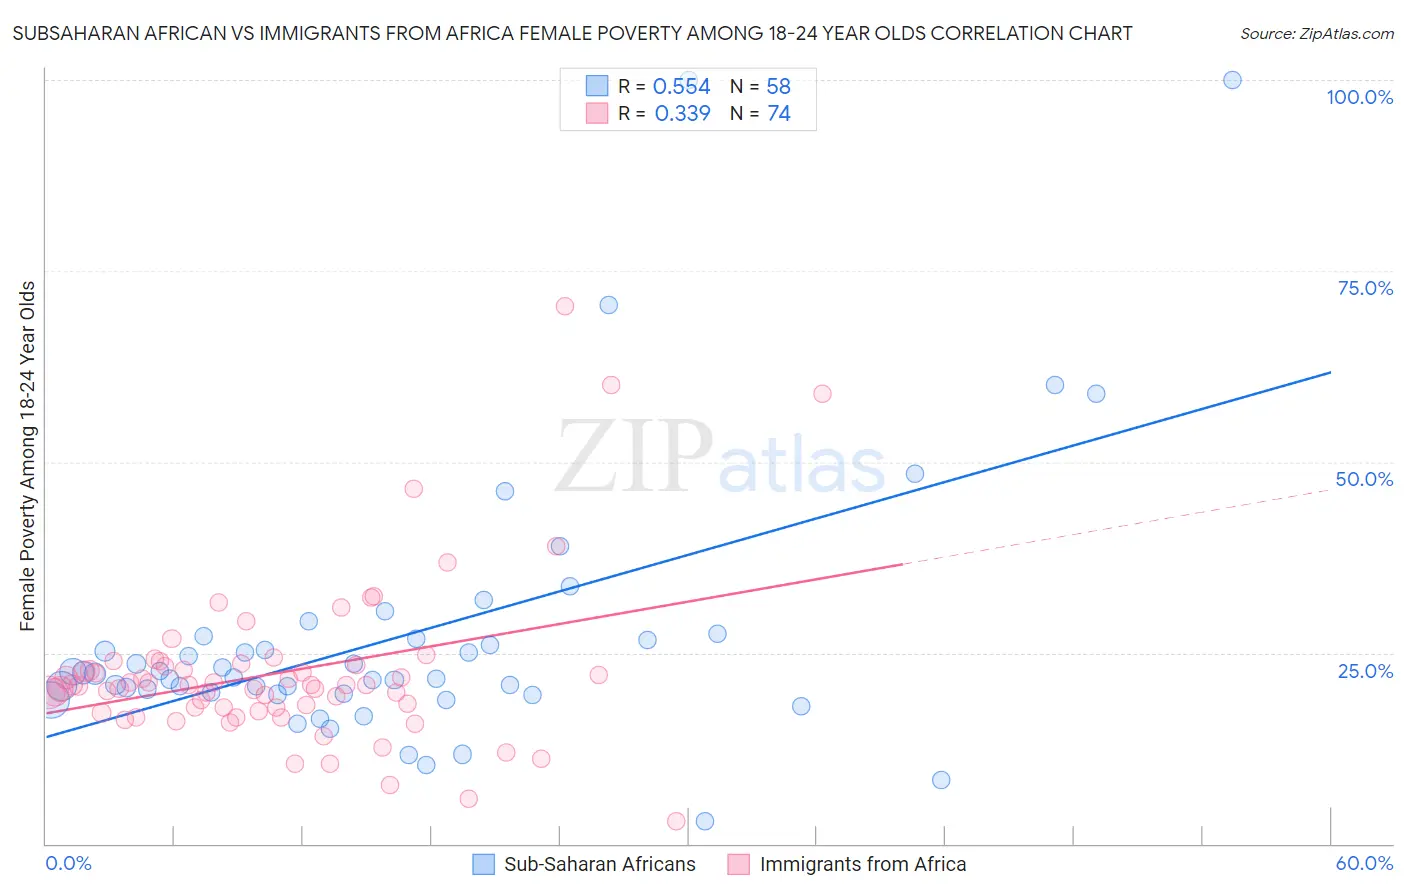 Subsaharan African vs Immigrants from Africa Female Poverty Among 18-24 Year Olds